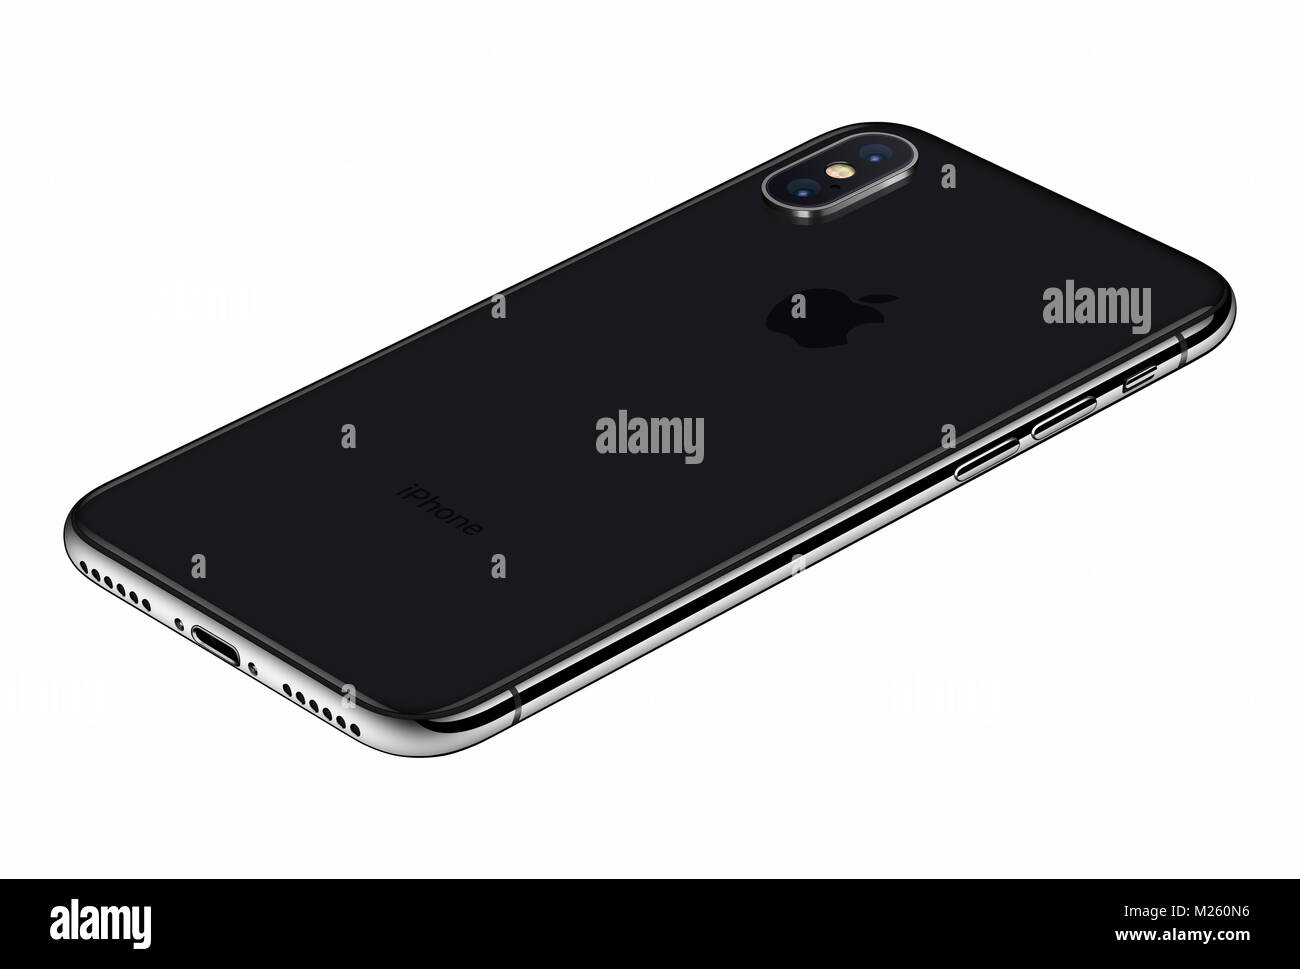 Perspective view black Apple iPhone X back side isolated on white background. iPhone 10 is the newest smartphone of Apple inc with frameless design. Stock Photo